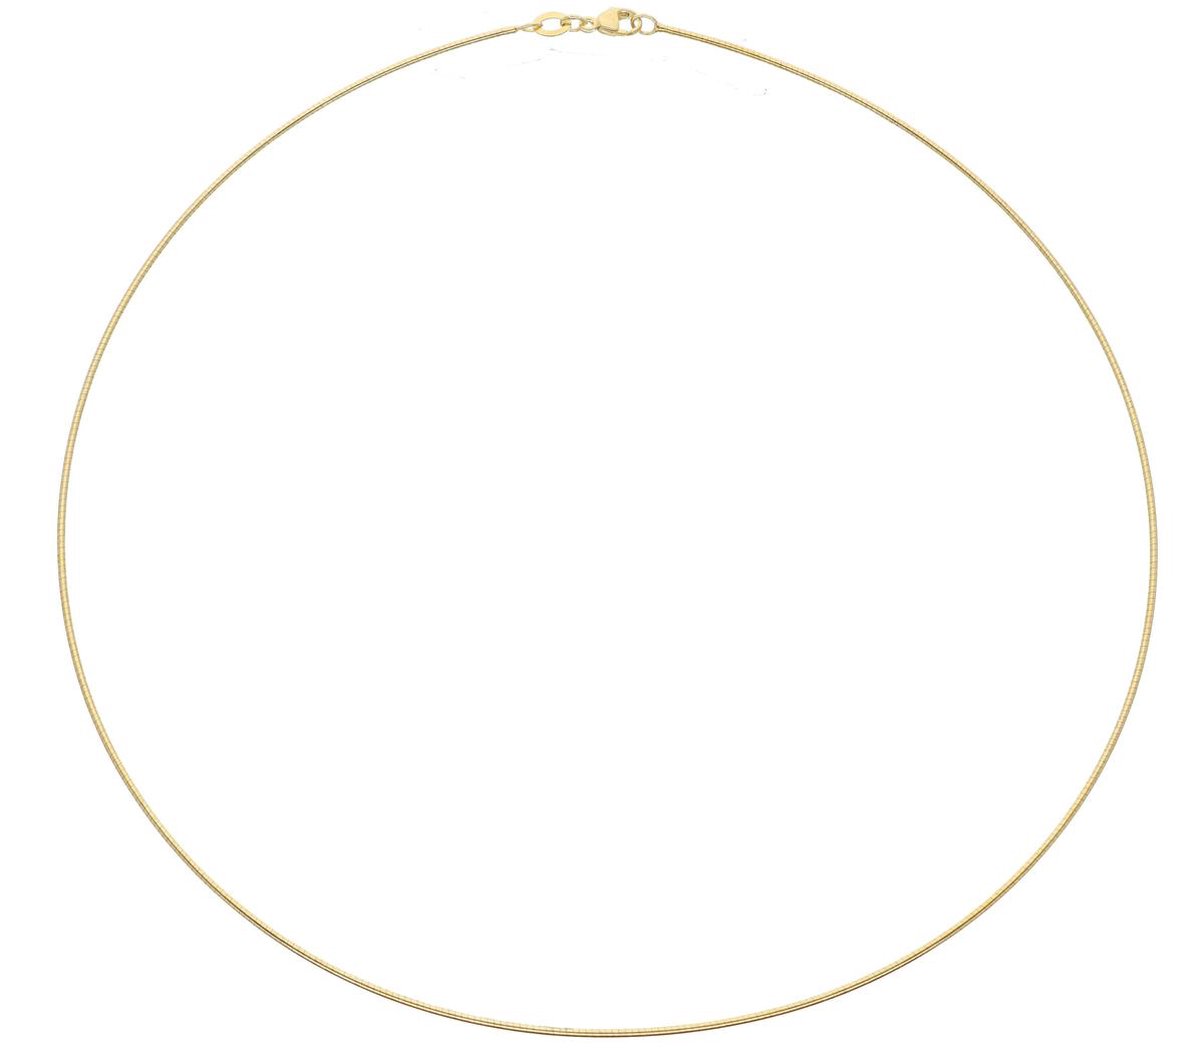 Glowketting - double - messing geel verguld - omega 1 mm - rond - 45 cm